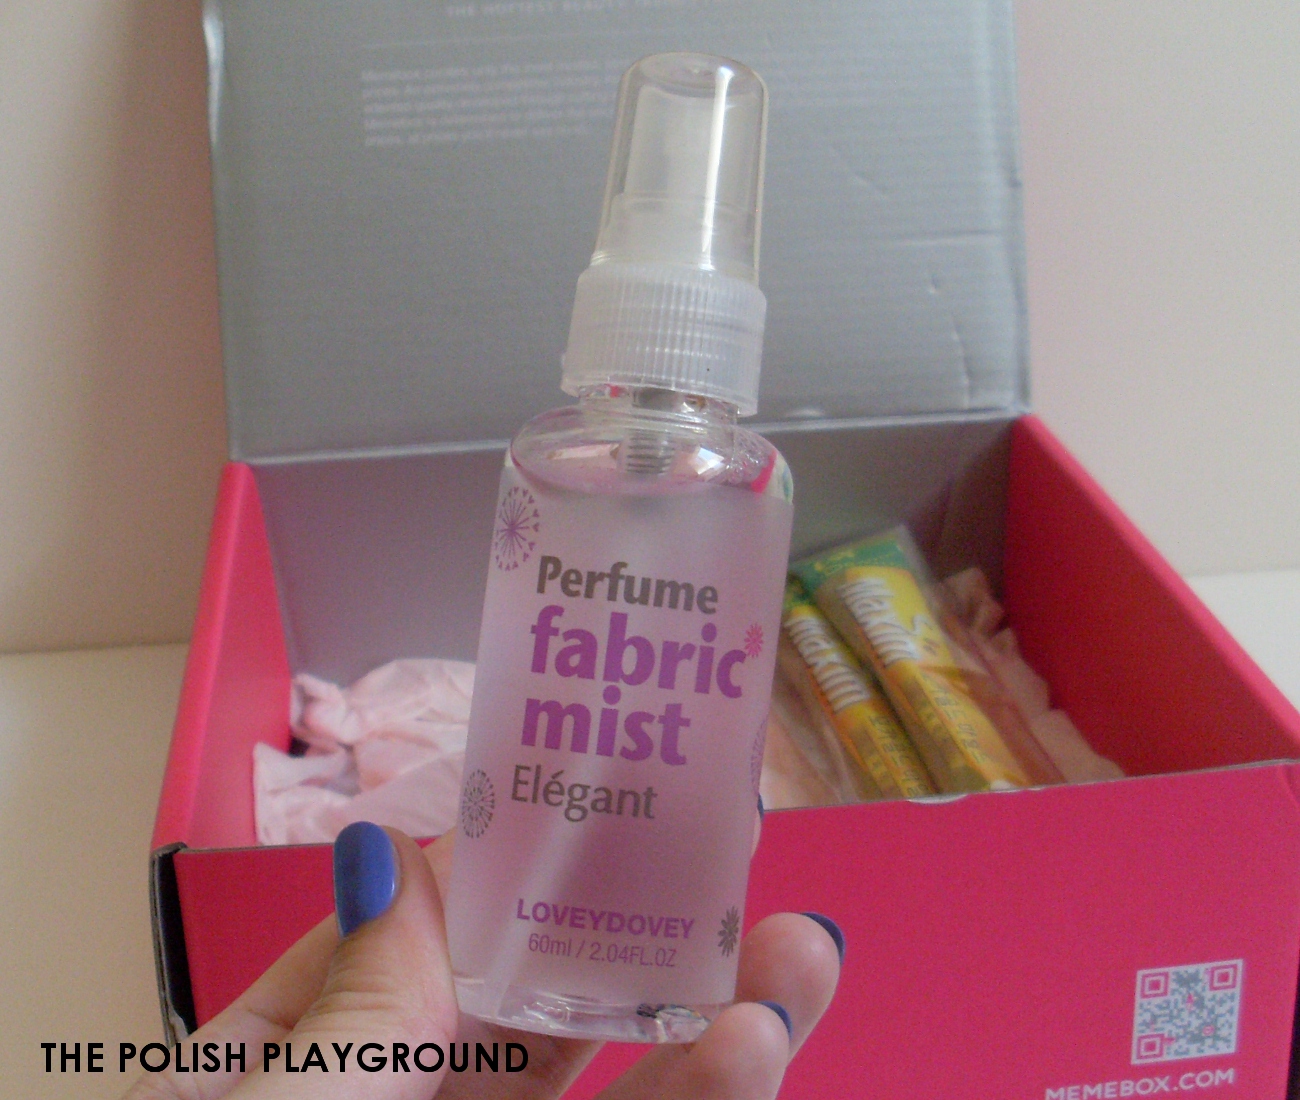 Memebox Office Essentials Unboxing - Lovey Dovey Perfume Fabric Mist